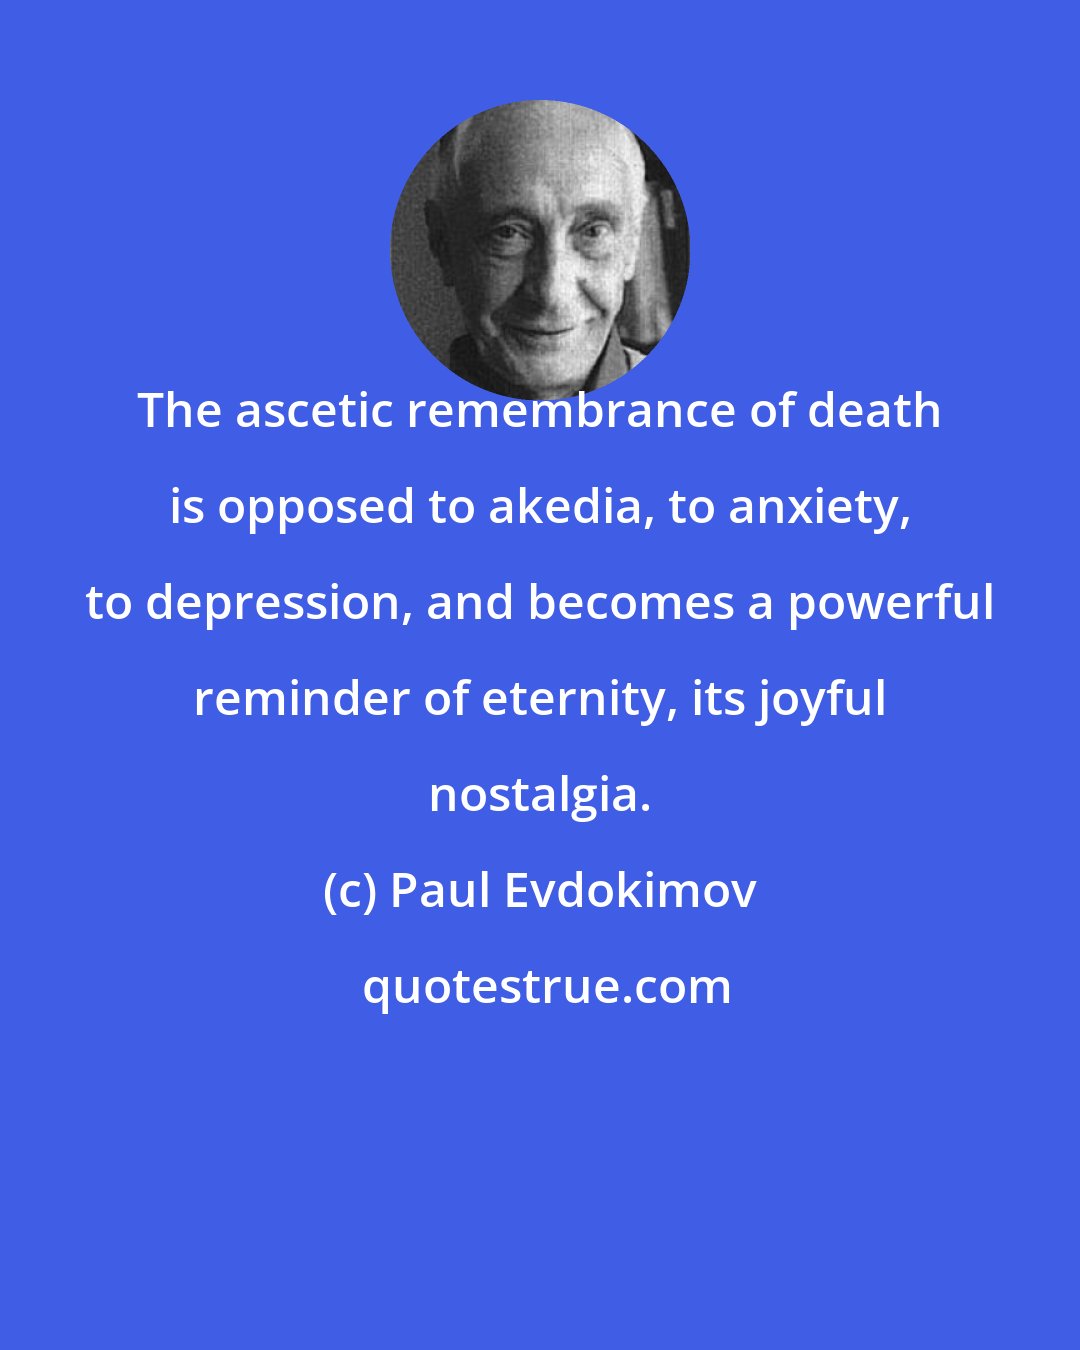 Paul Evdokimov: The ascetic remembrance of death is opposed to akedia, to anxiety, to depression, and becomes a powerful reminder of eternity, its joyful nostalgia.